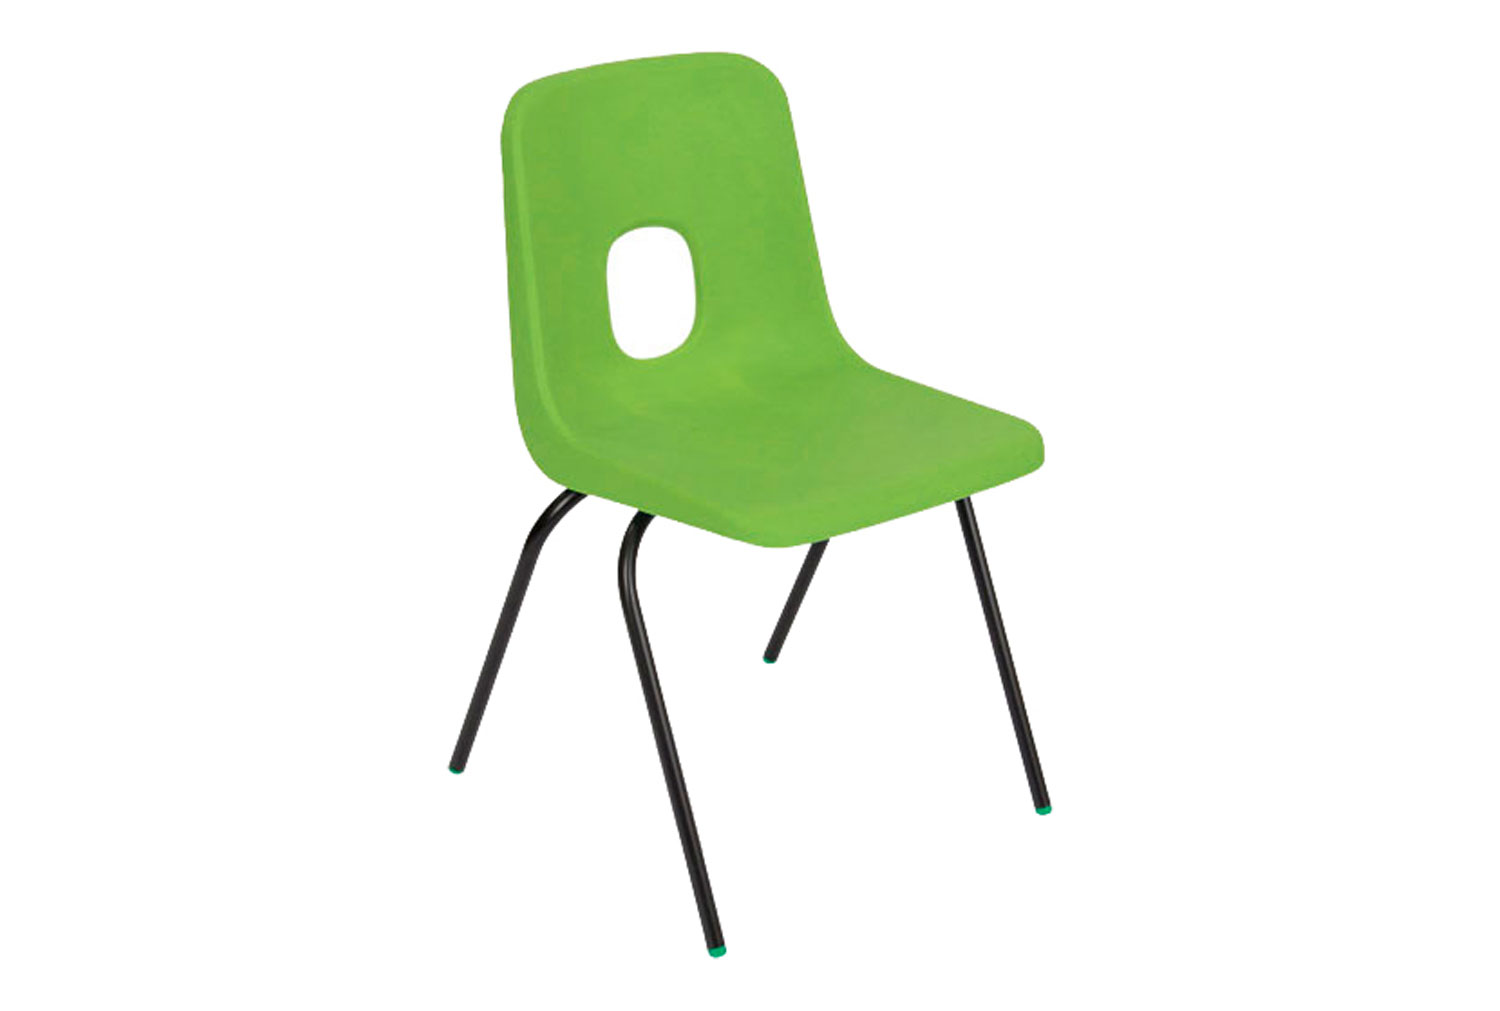 Qty 8 - Hille E Series Classroom Chair, 11-14 Years - 41wx37dx43h (cm), Grey Frame, Acid Green